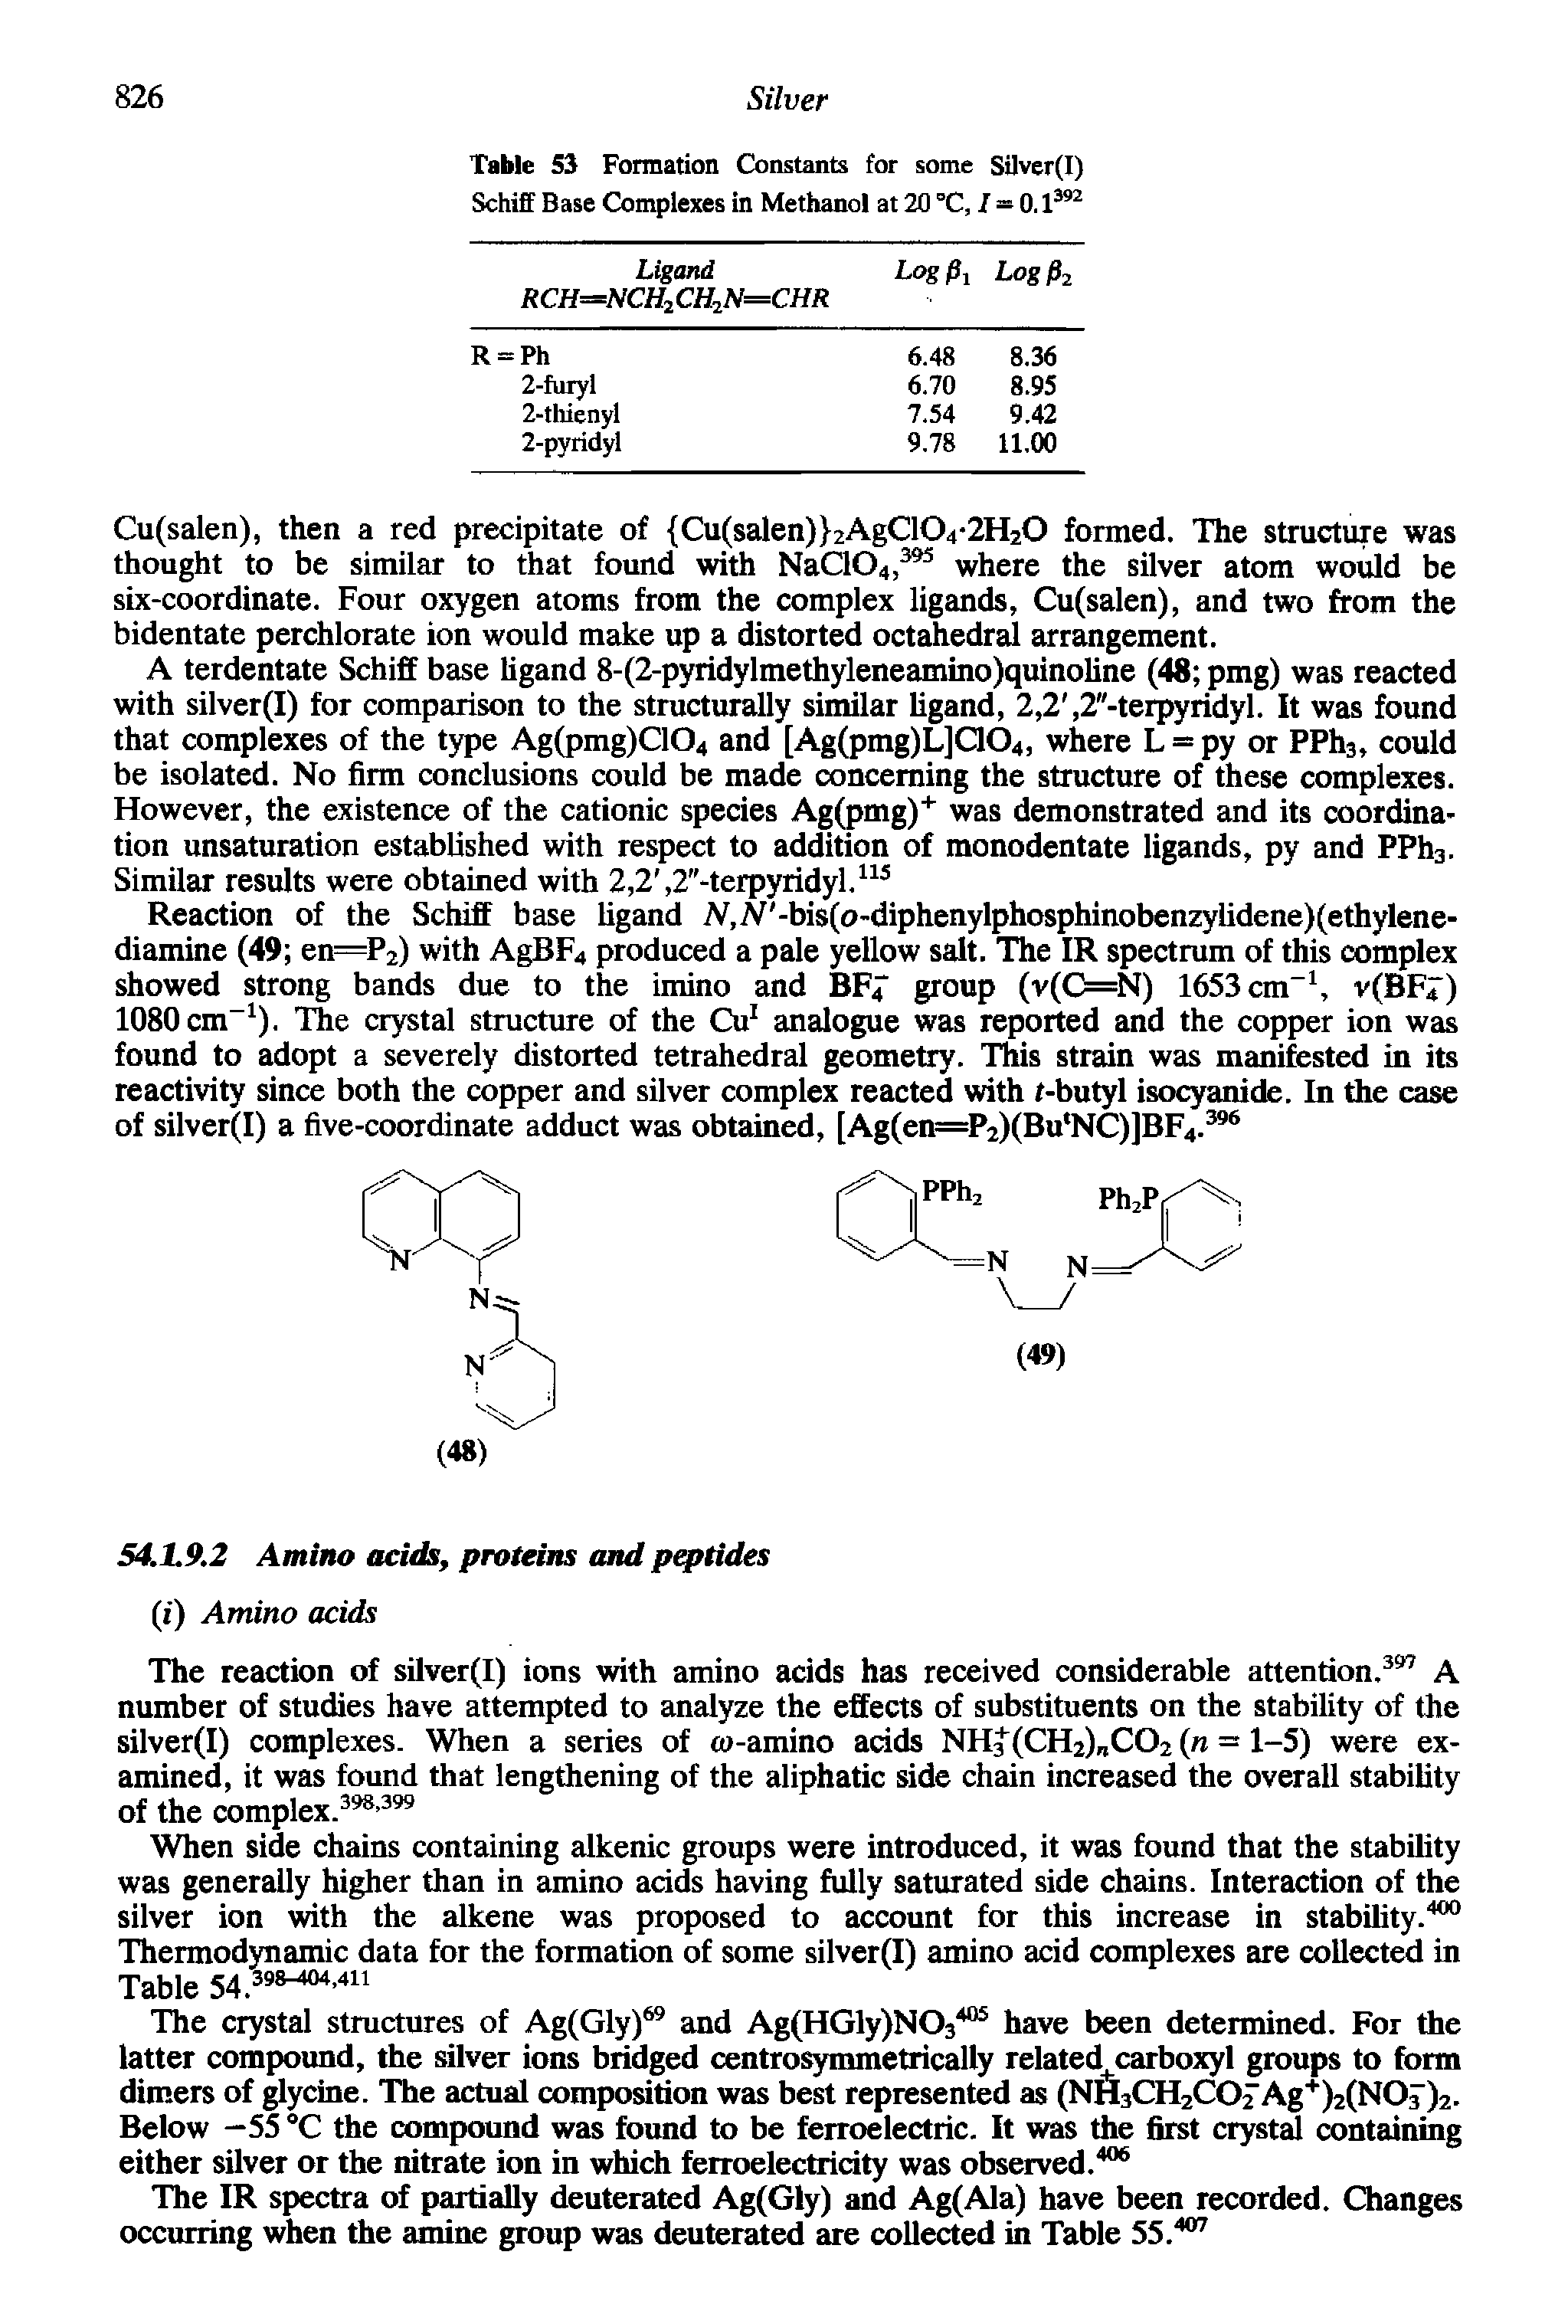 Table 53 Formation Constants for some Silver(I) Schiff Base Complexes in Methanol at 20°C, I - 0.I392...